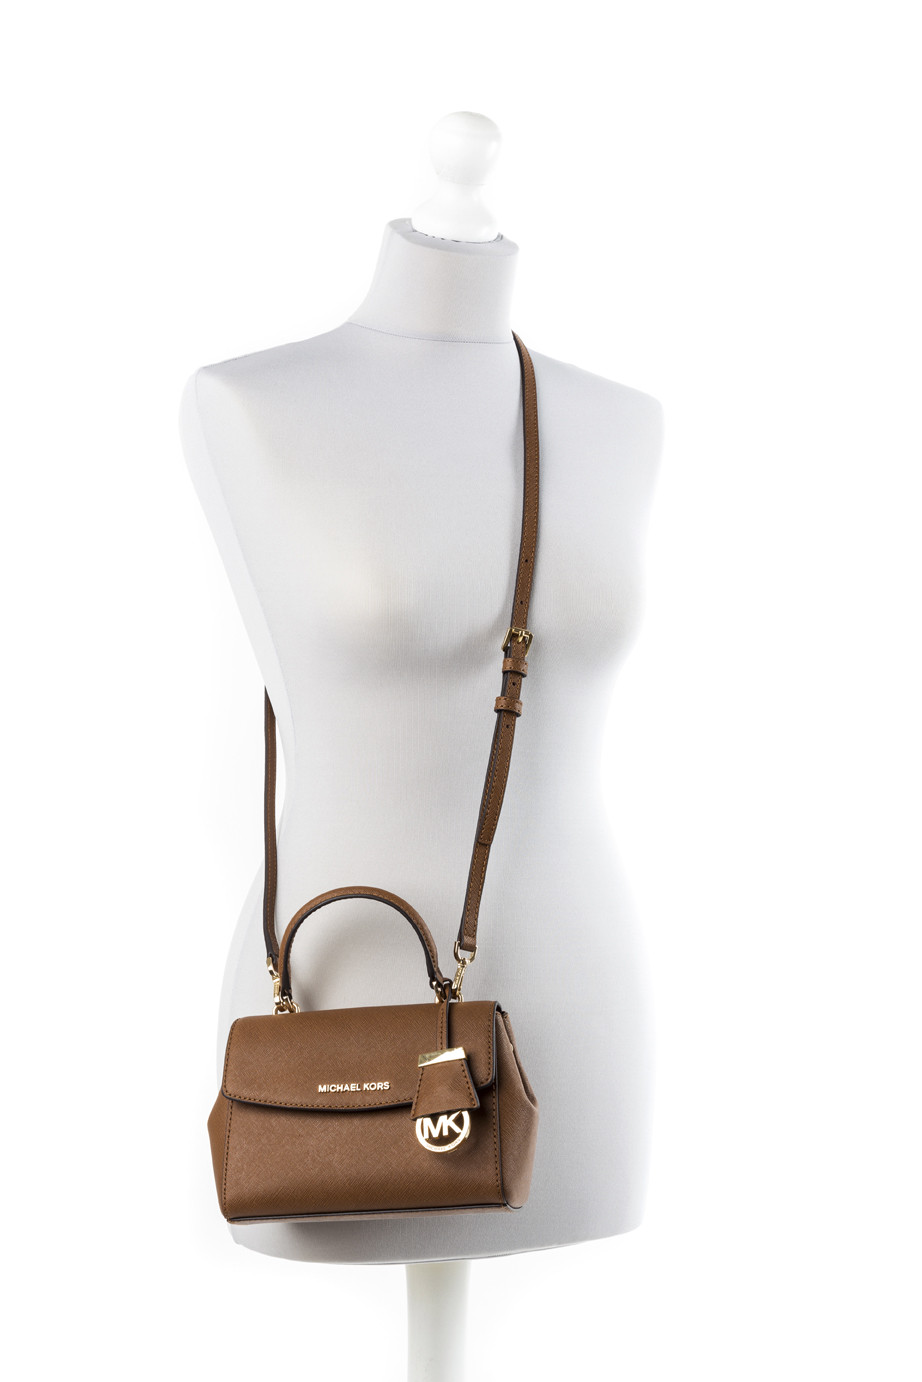 Michael Kors Ava Extra-Small Saffiano Leather Crossbody in Luggage